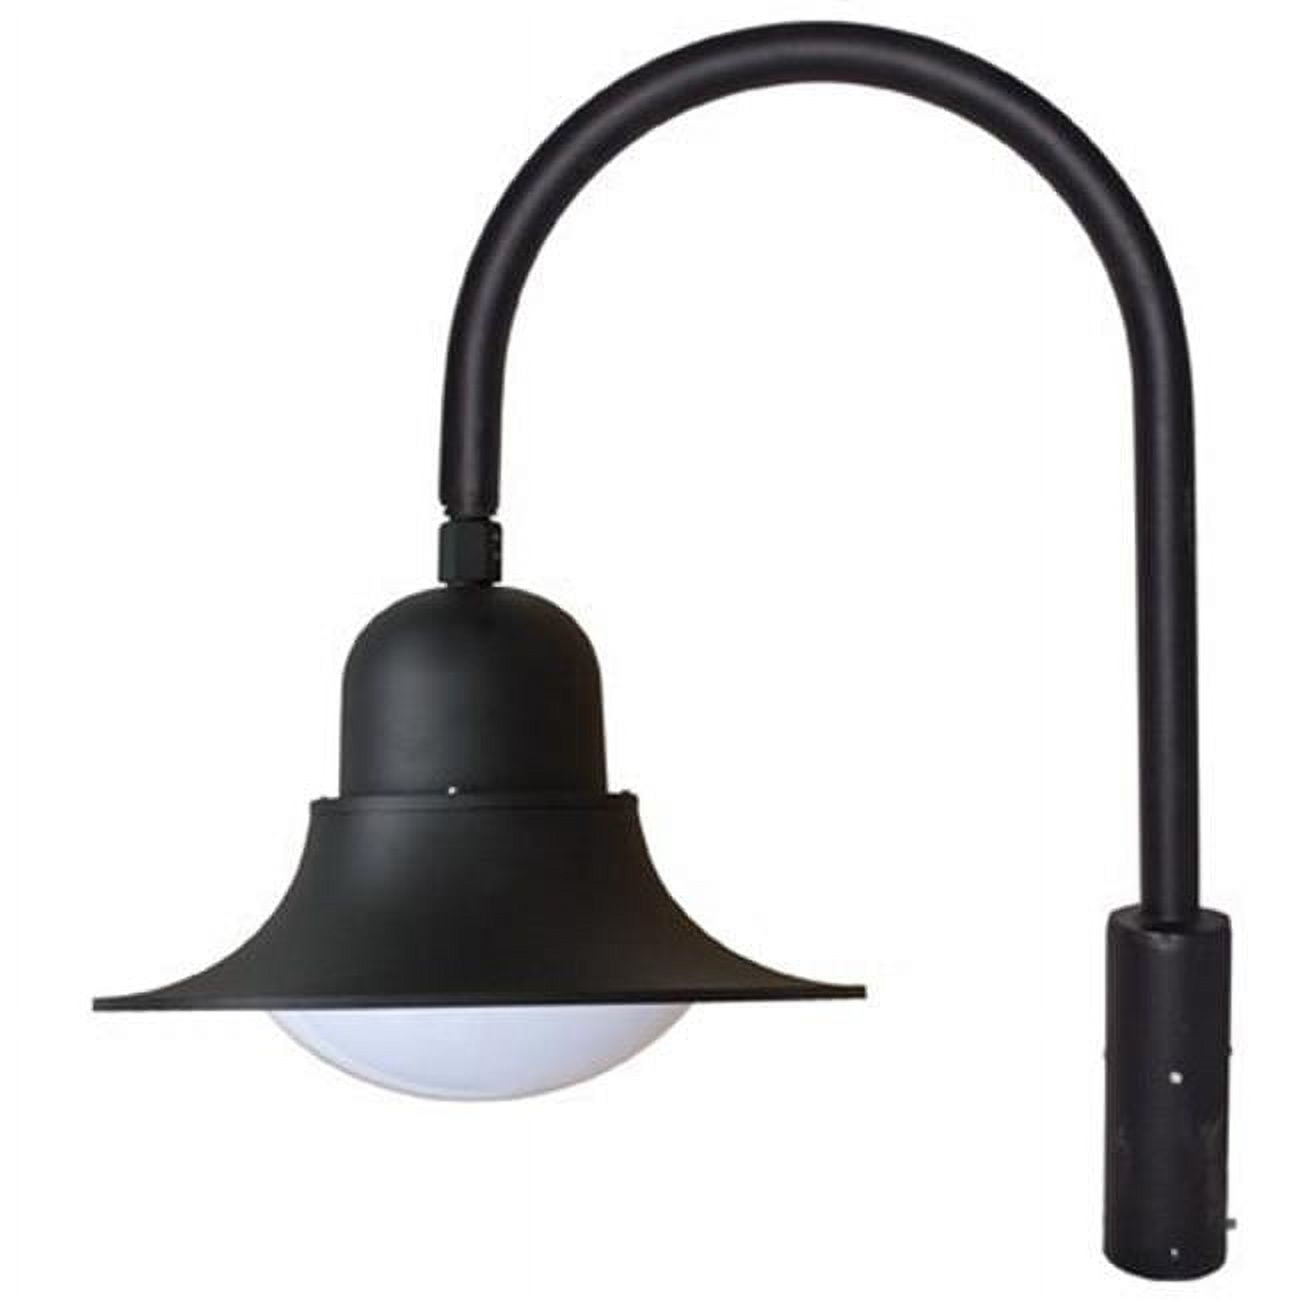 Picture of Dabmar Lighting GM614-B-MT 70W Powder Coated Cast Aluminum Post Top Light Fixture with High Pressure Sodium Lamp, Black - 35.50 x 22 x 30.92 in.